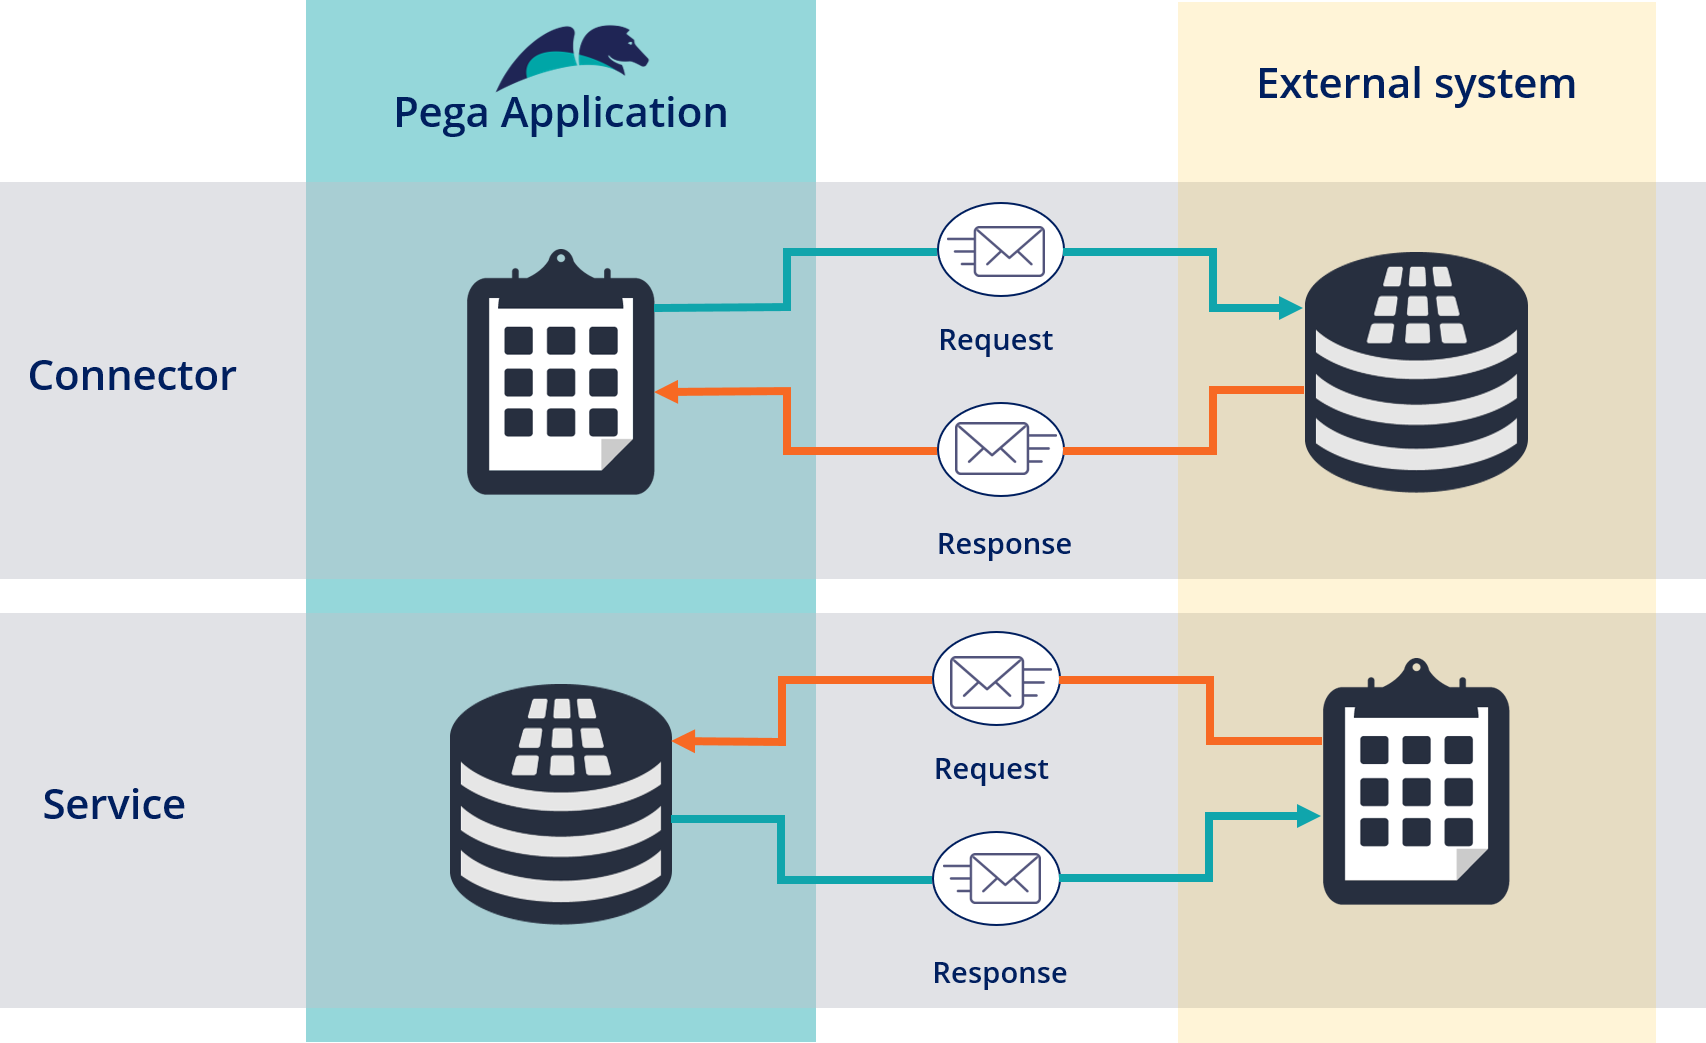 A diagram that shows Pega Platform requesting information from an external source (connector) and an external source requesting information from Pega Platform (service).